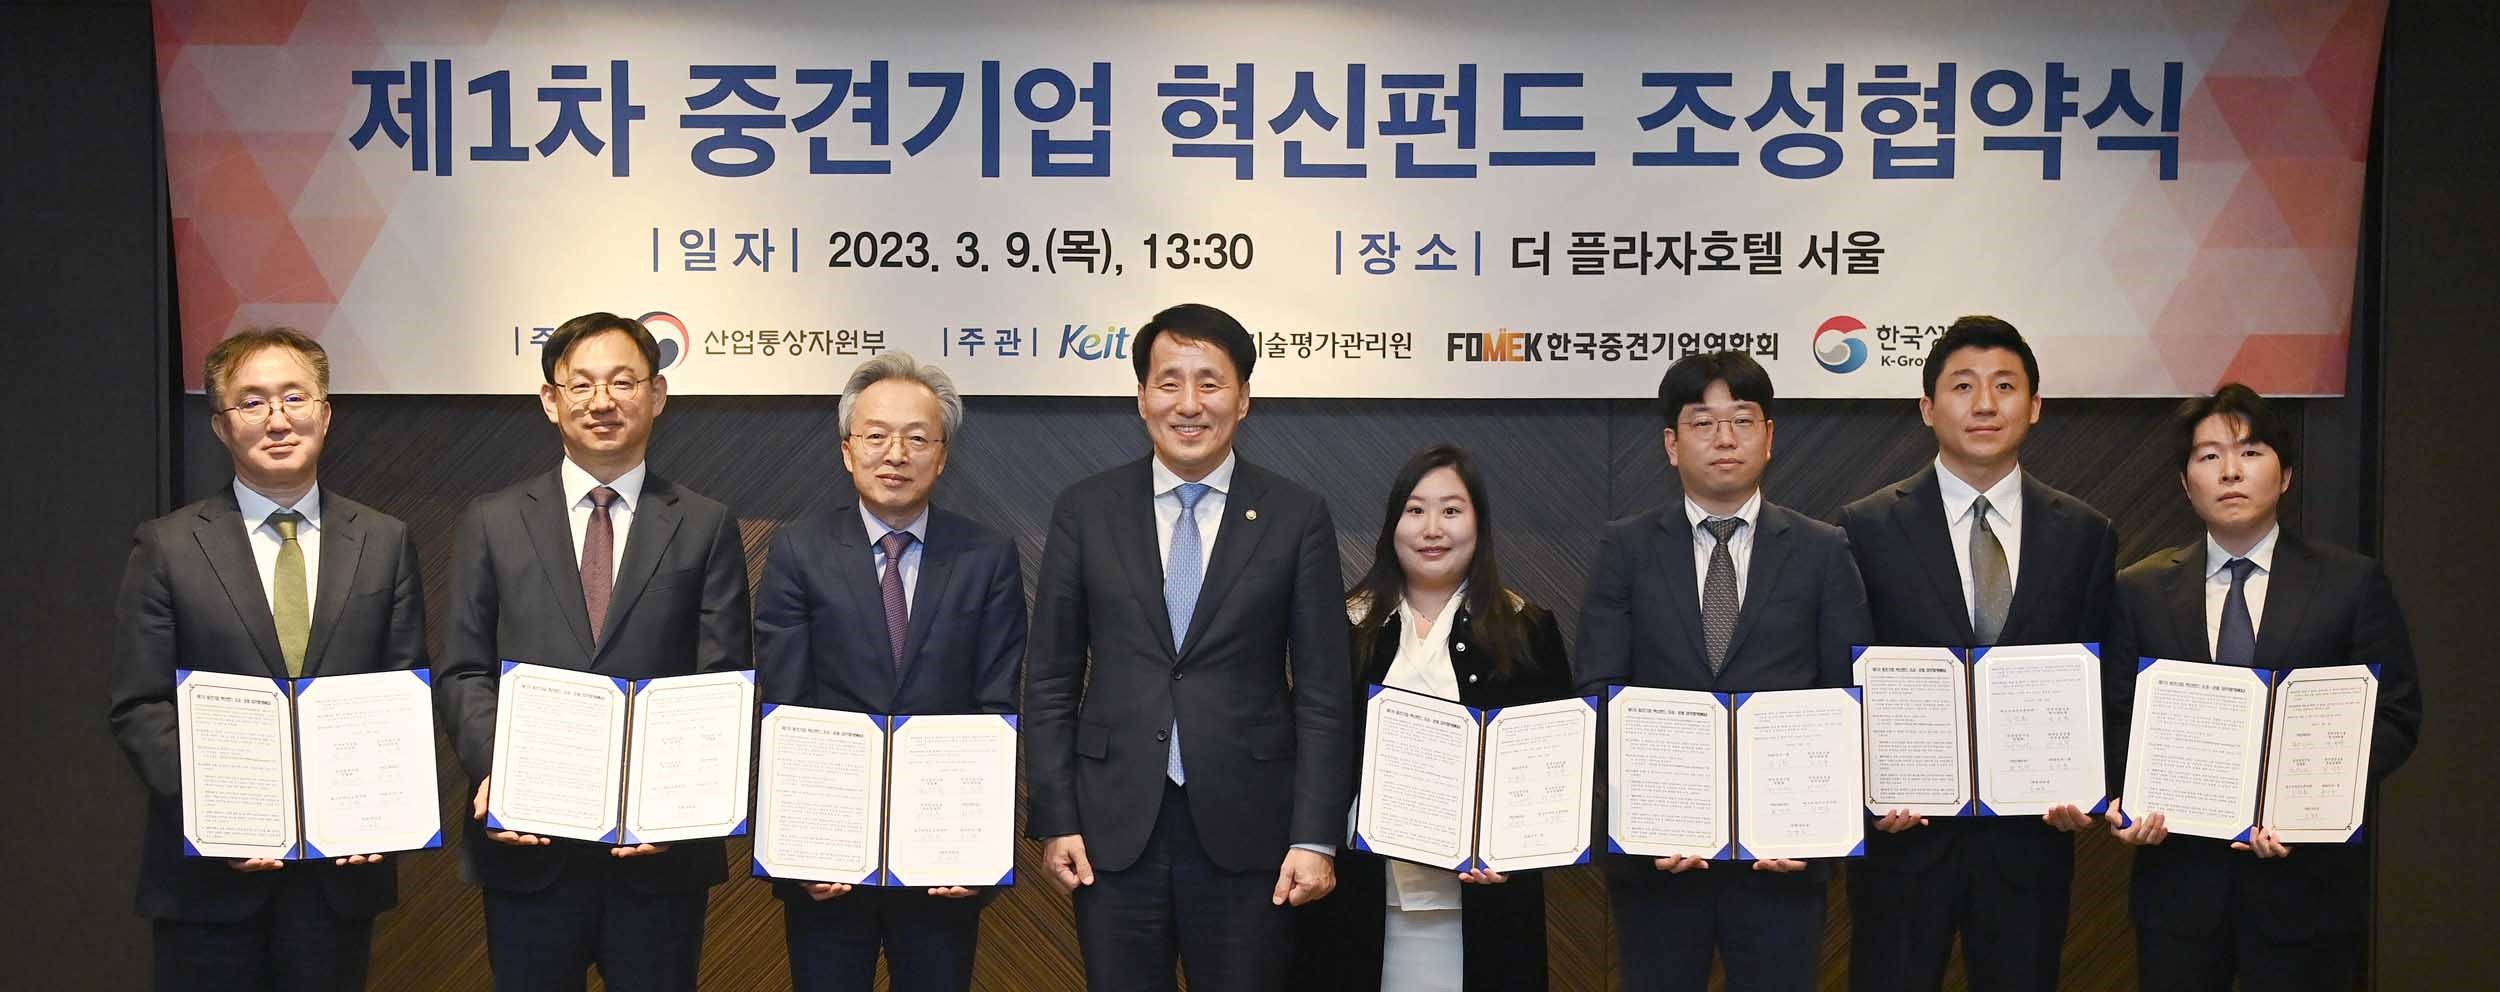 1st Vice Minister attends MOU ceremony launching Korea’s innovation fund for middle-market companies 